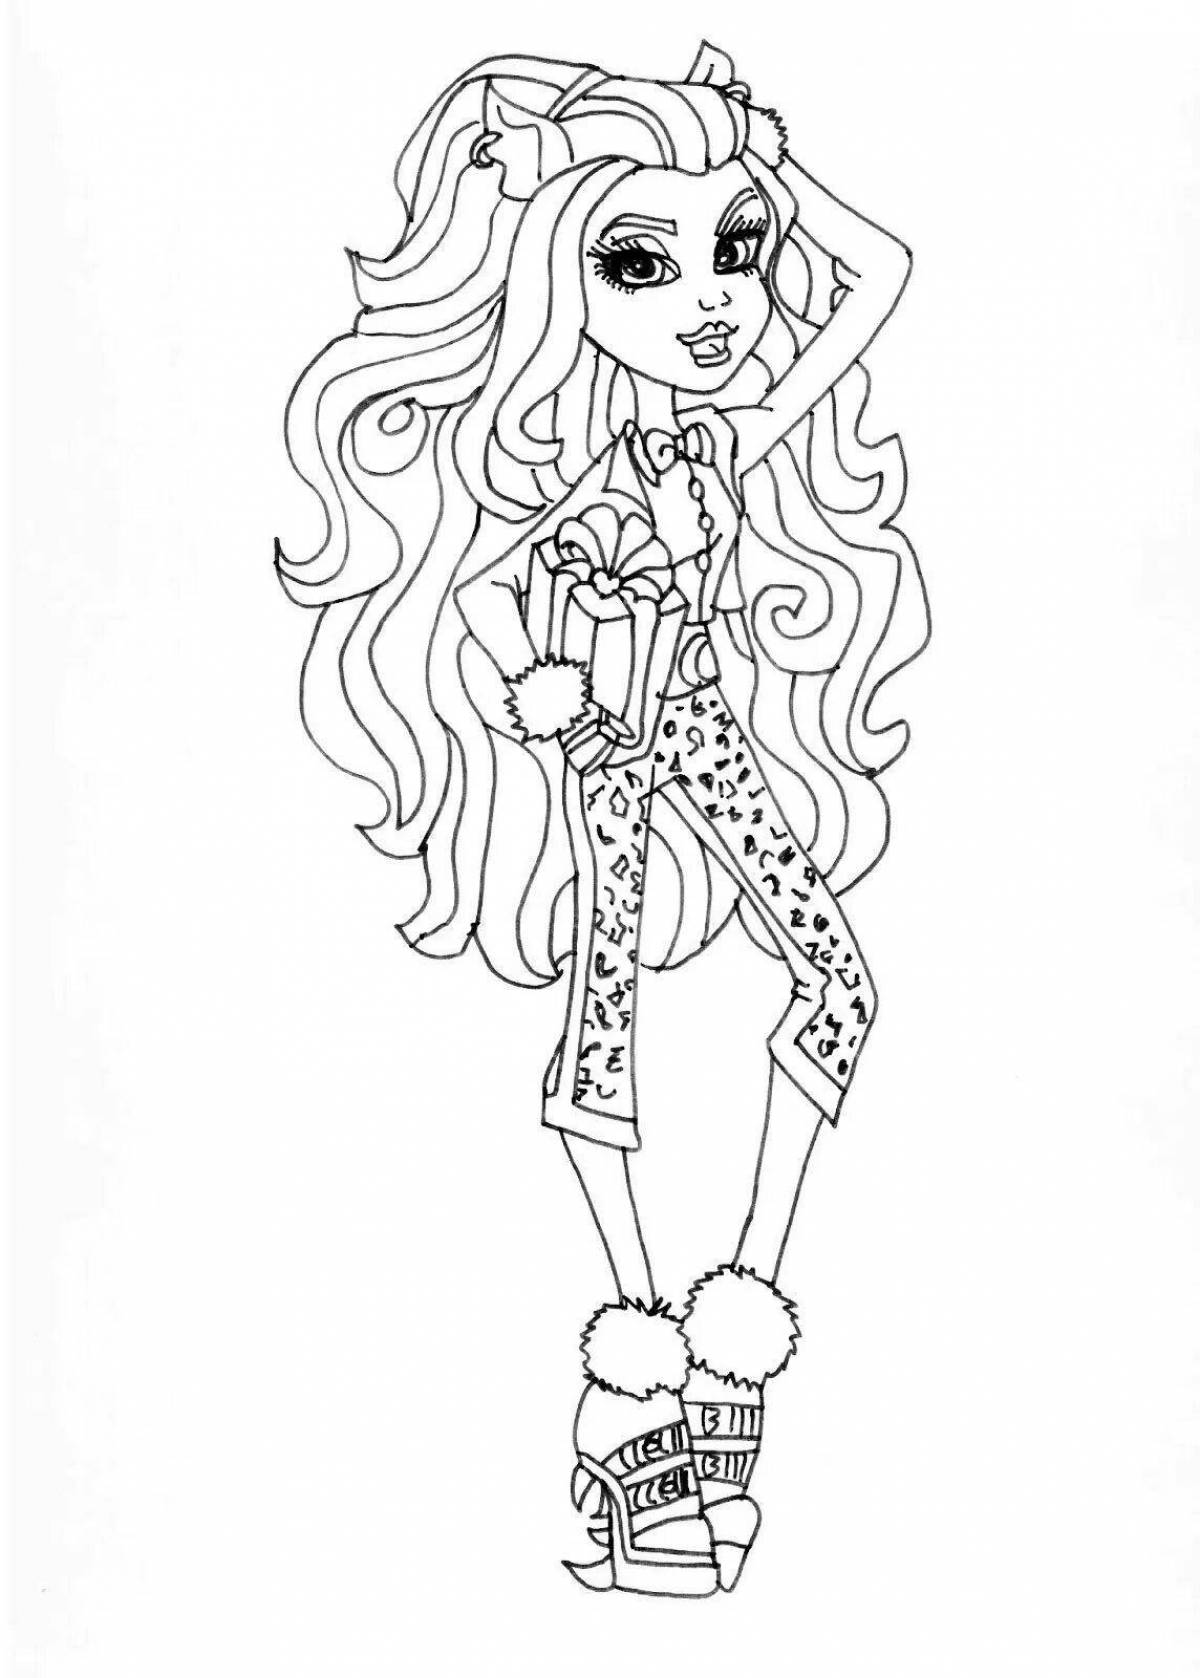 Coloring monster high games